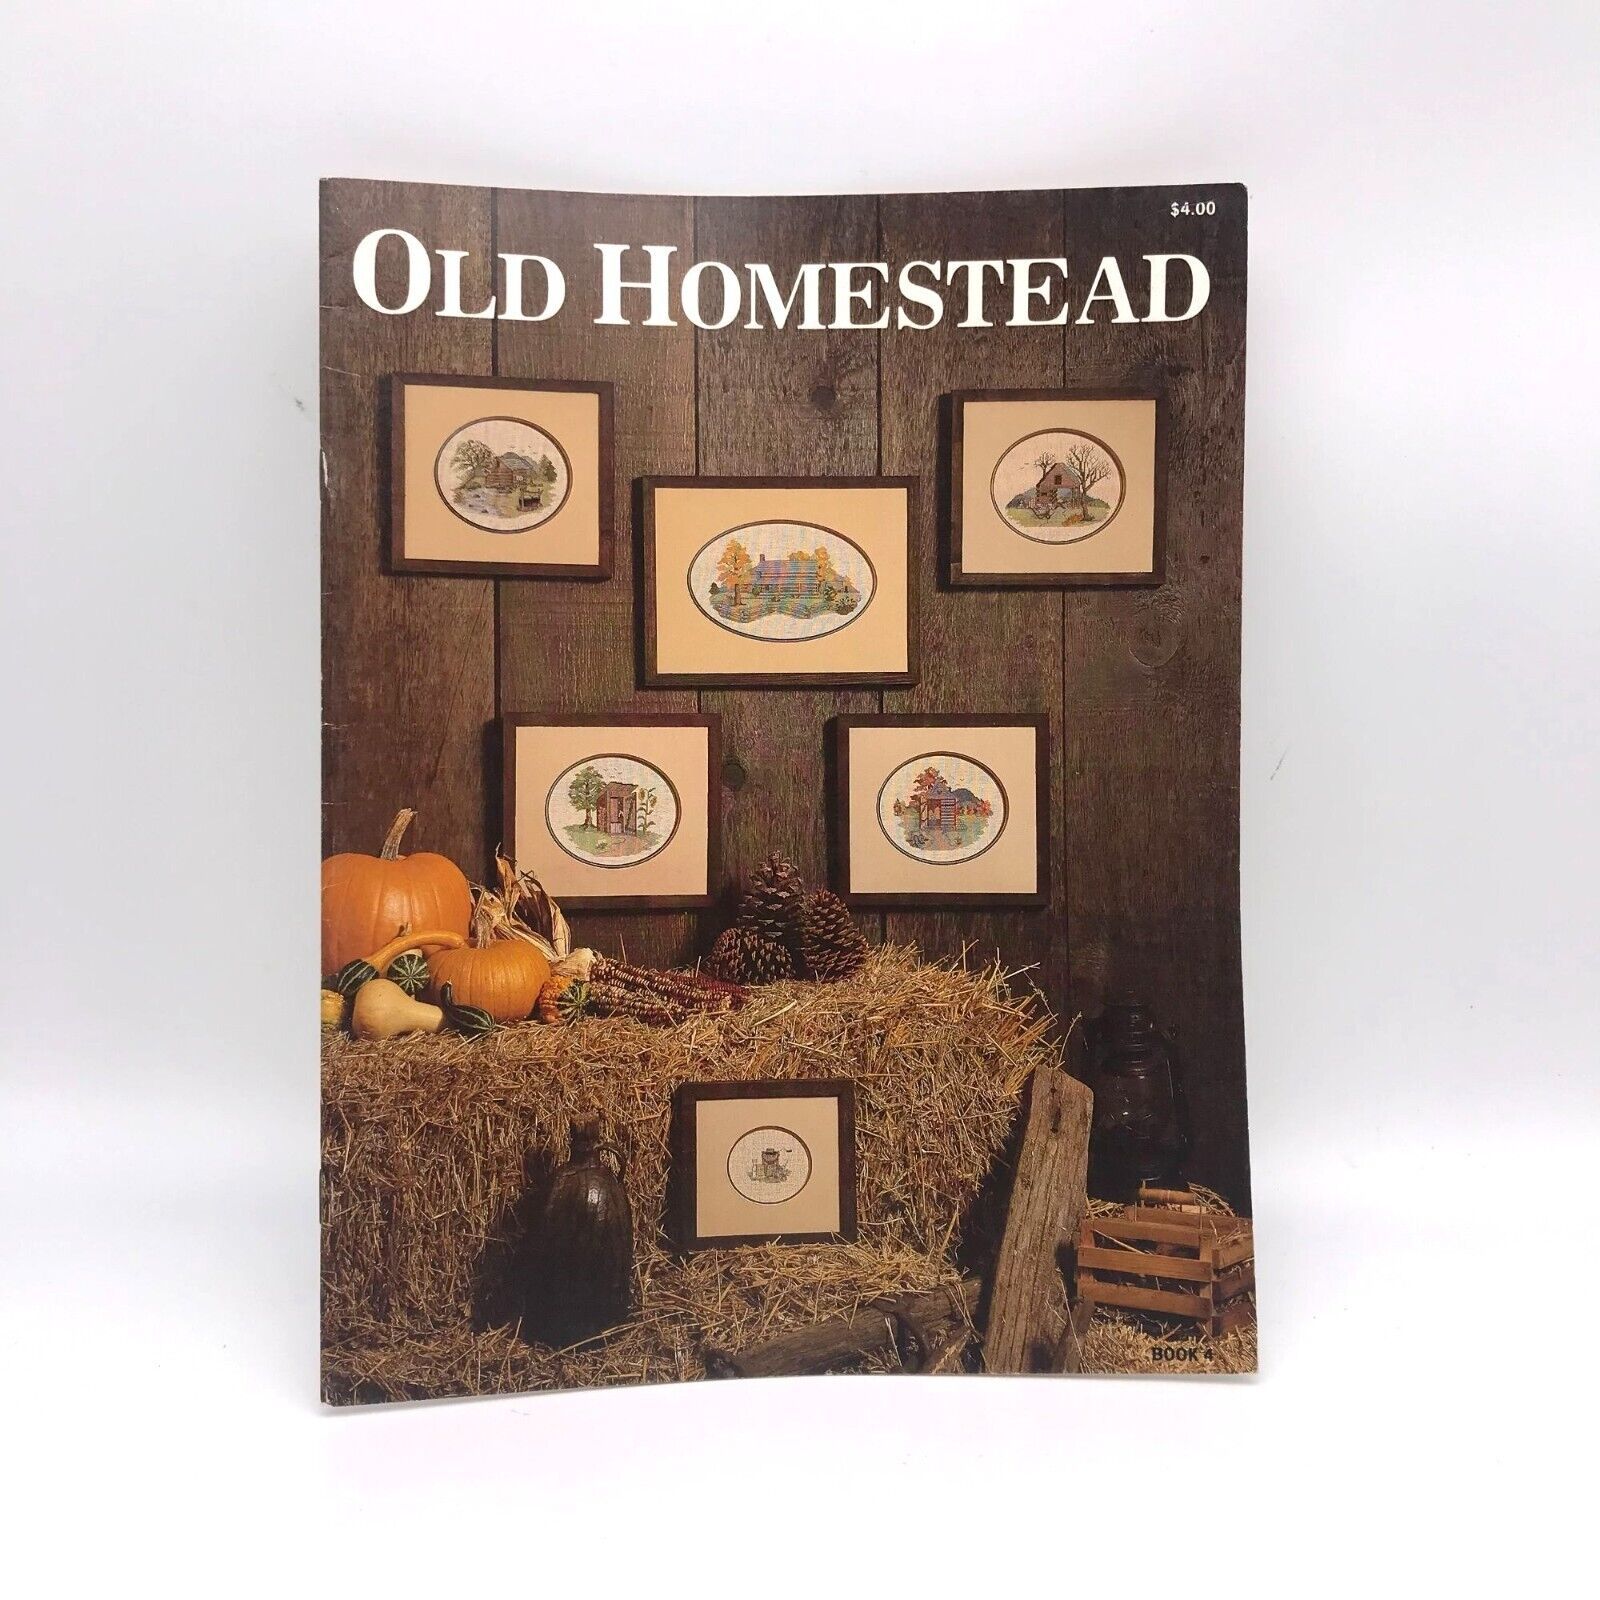 Vintage Cross Stitch Patterns, Old Homestead Book 4, Mary Frances Designs 1982 - $12.60